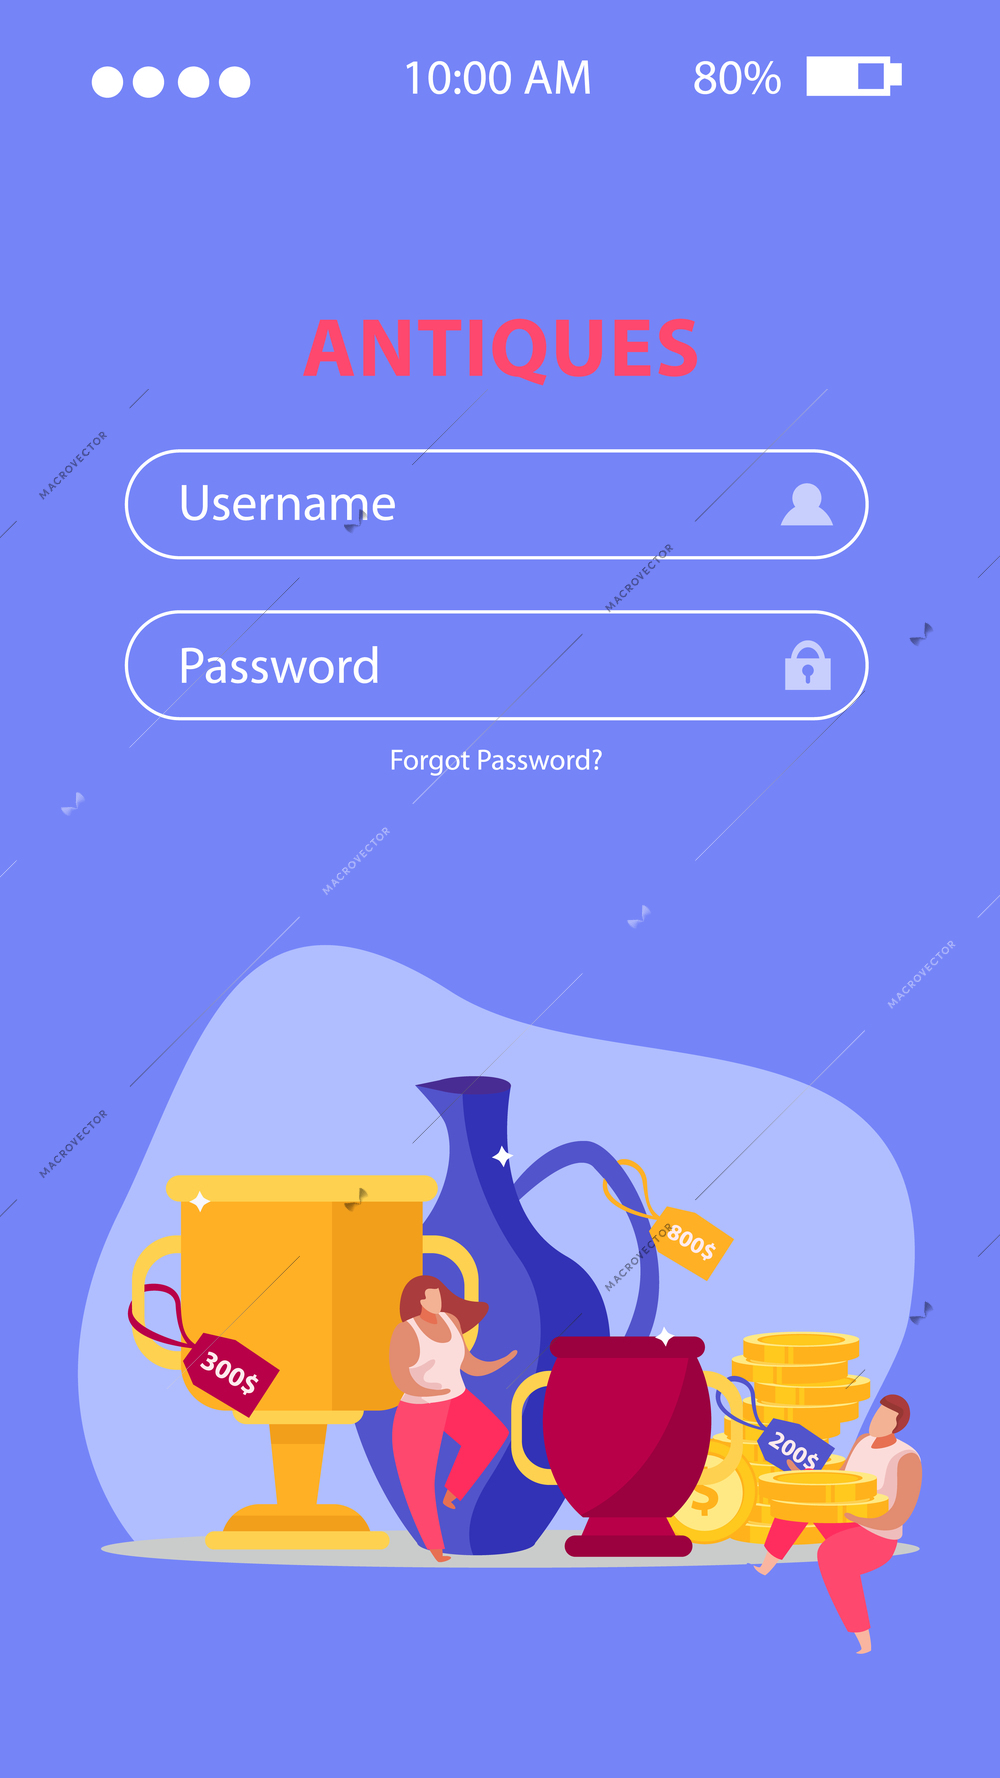 Pawnshop flat vertical background with fields for typing username and password with doodle images and people vector illustration